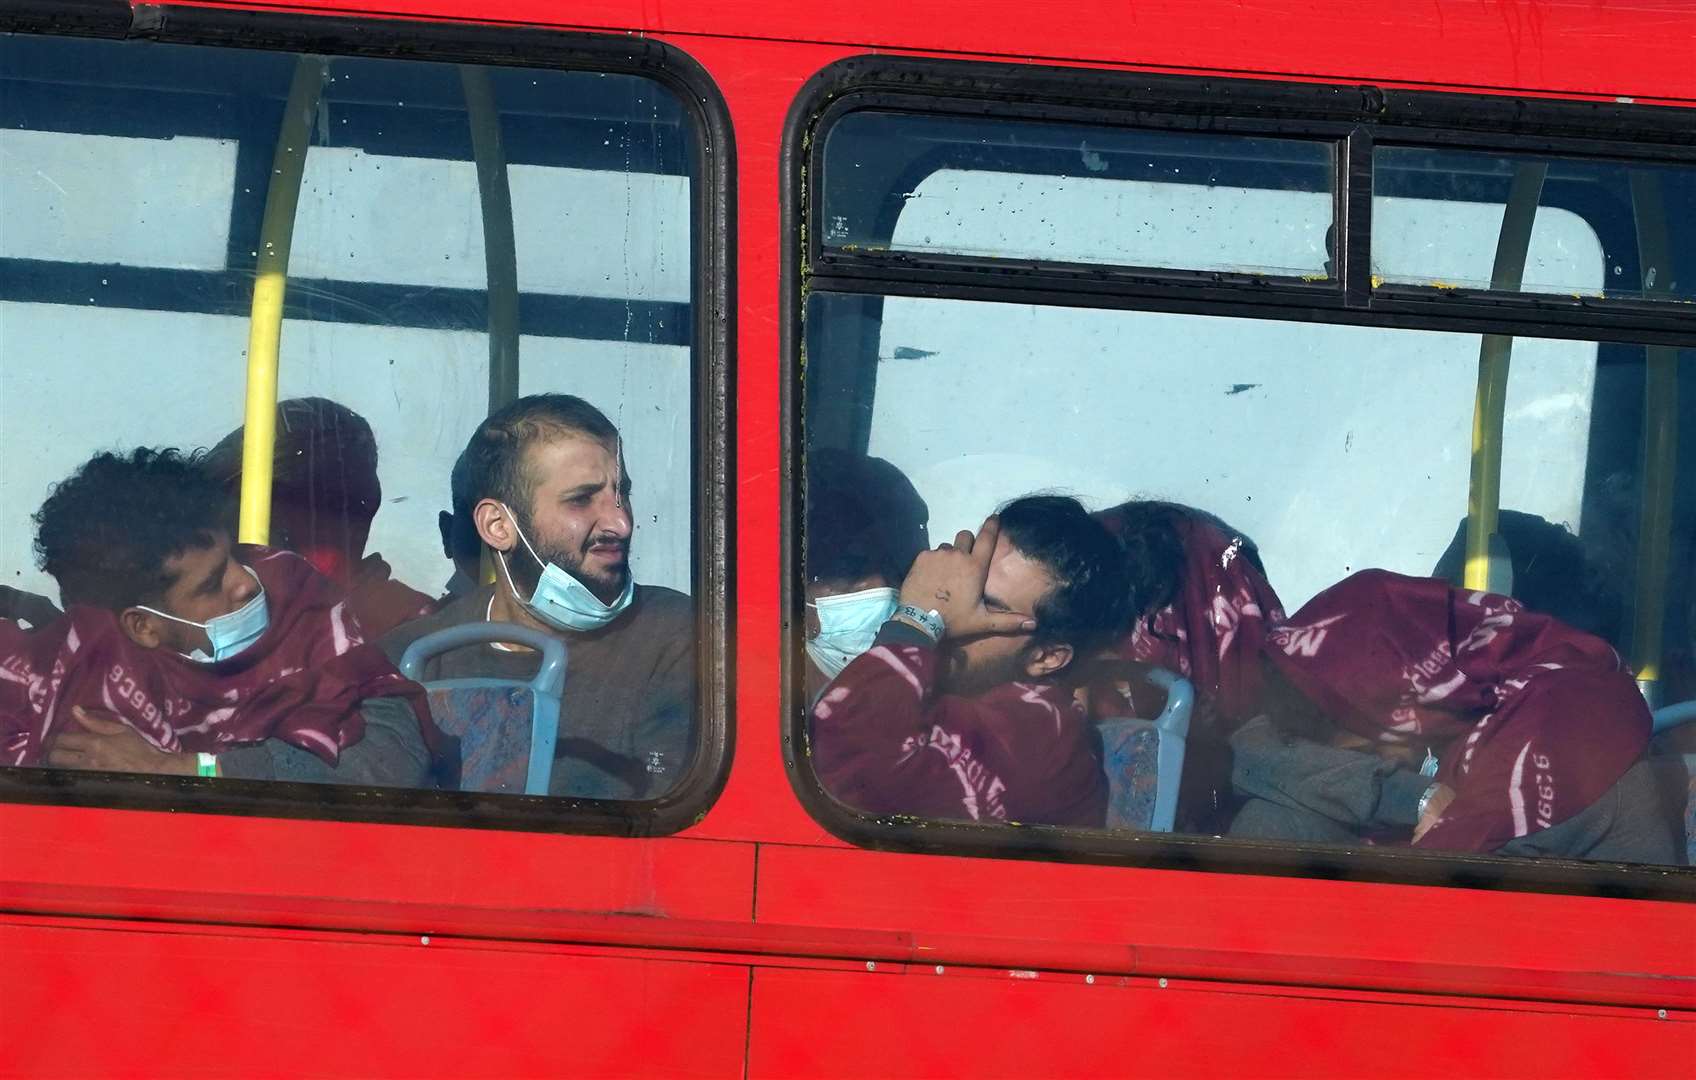 A group of people thought to be migrants wait on a holding bus after being brought in to Dover, Kent (Gareth Fuller/PA)